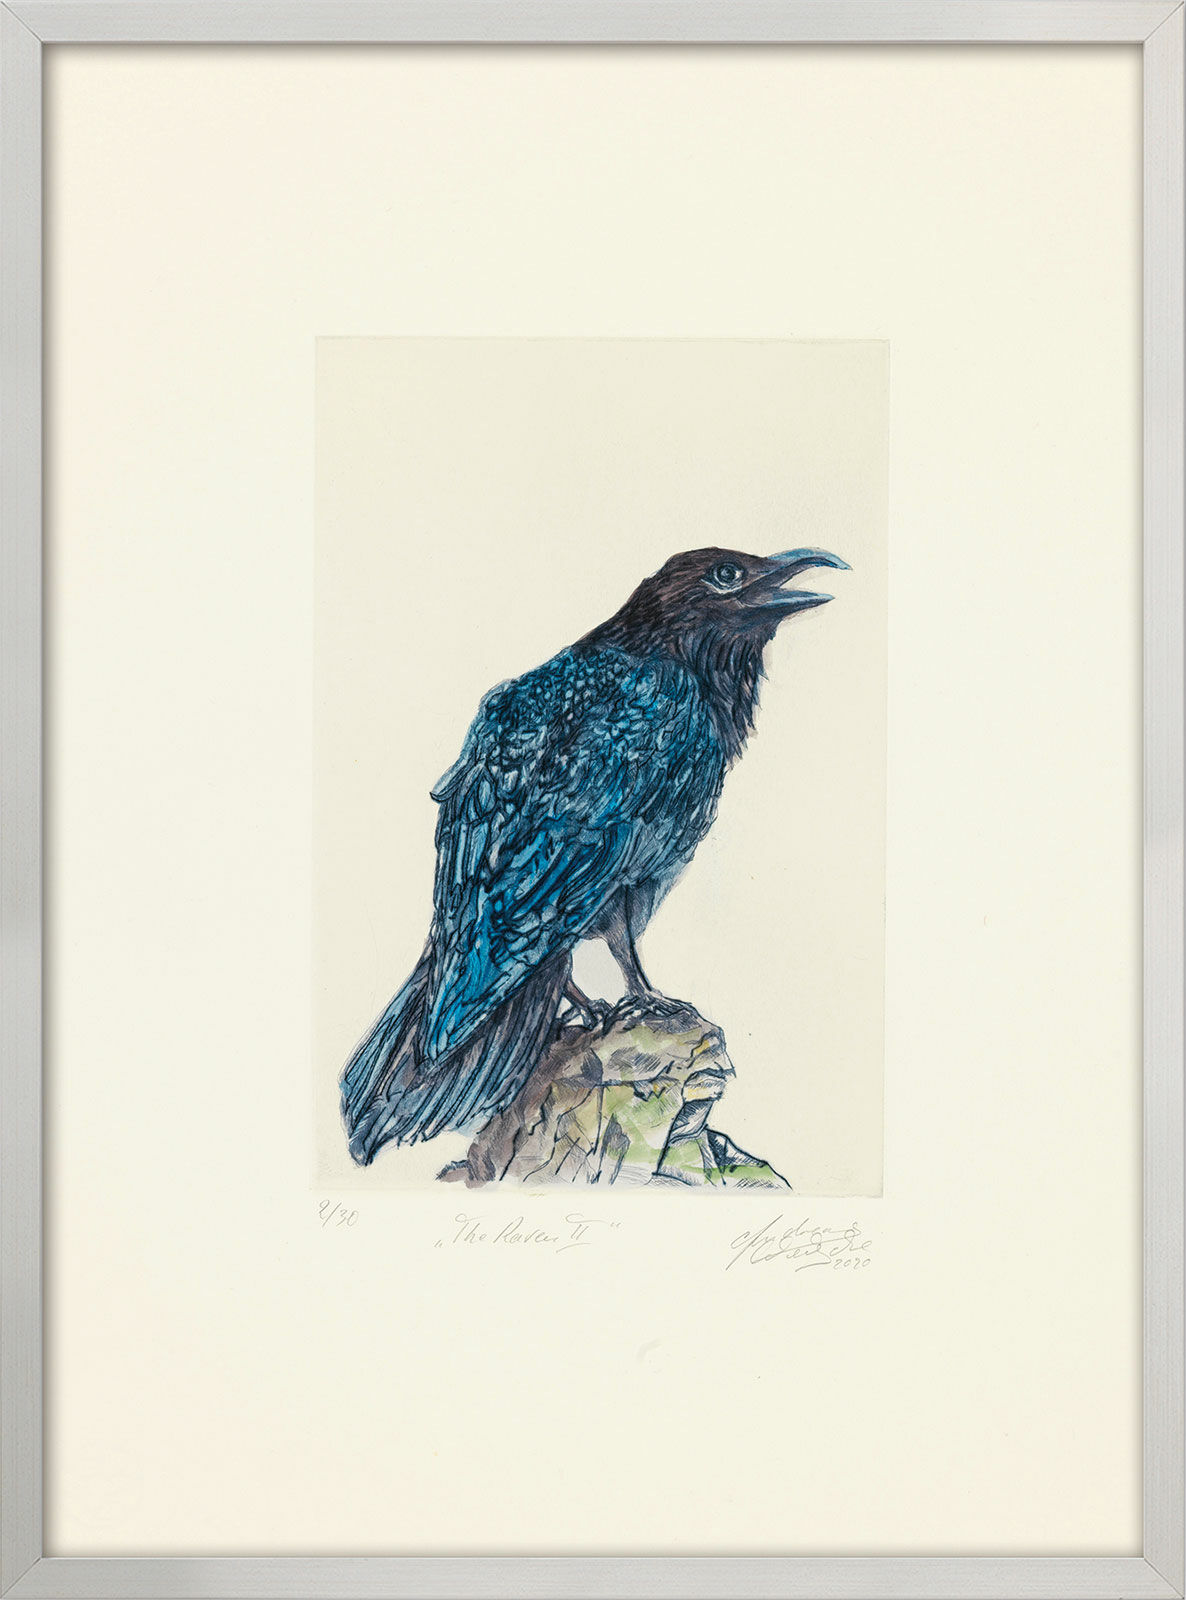 Picture "The Raven II" (2020), framed by Andreas Weische